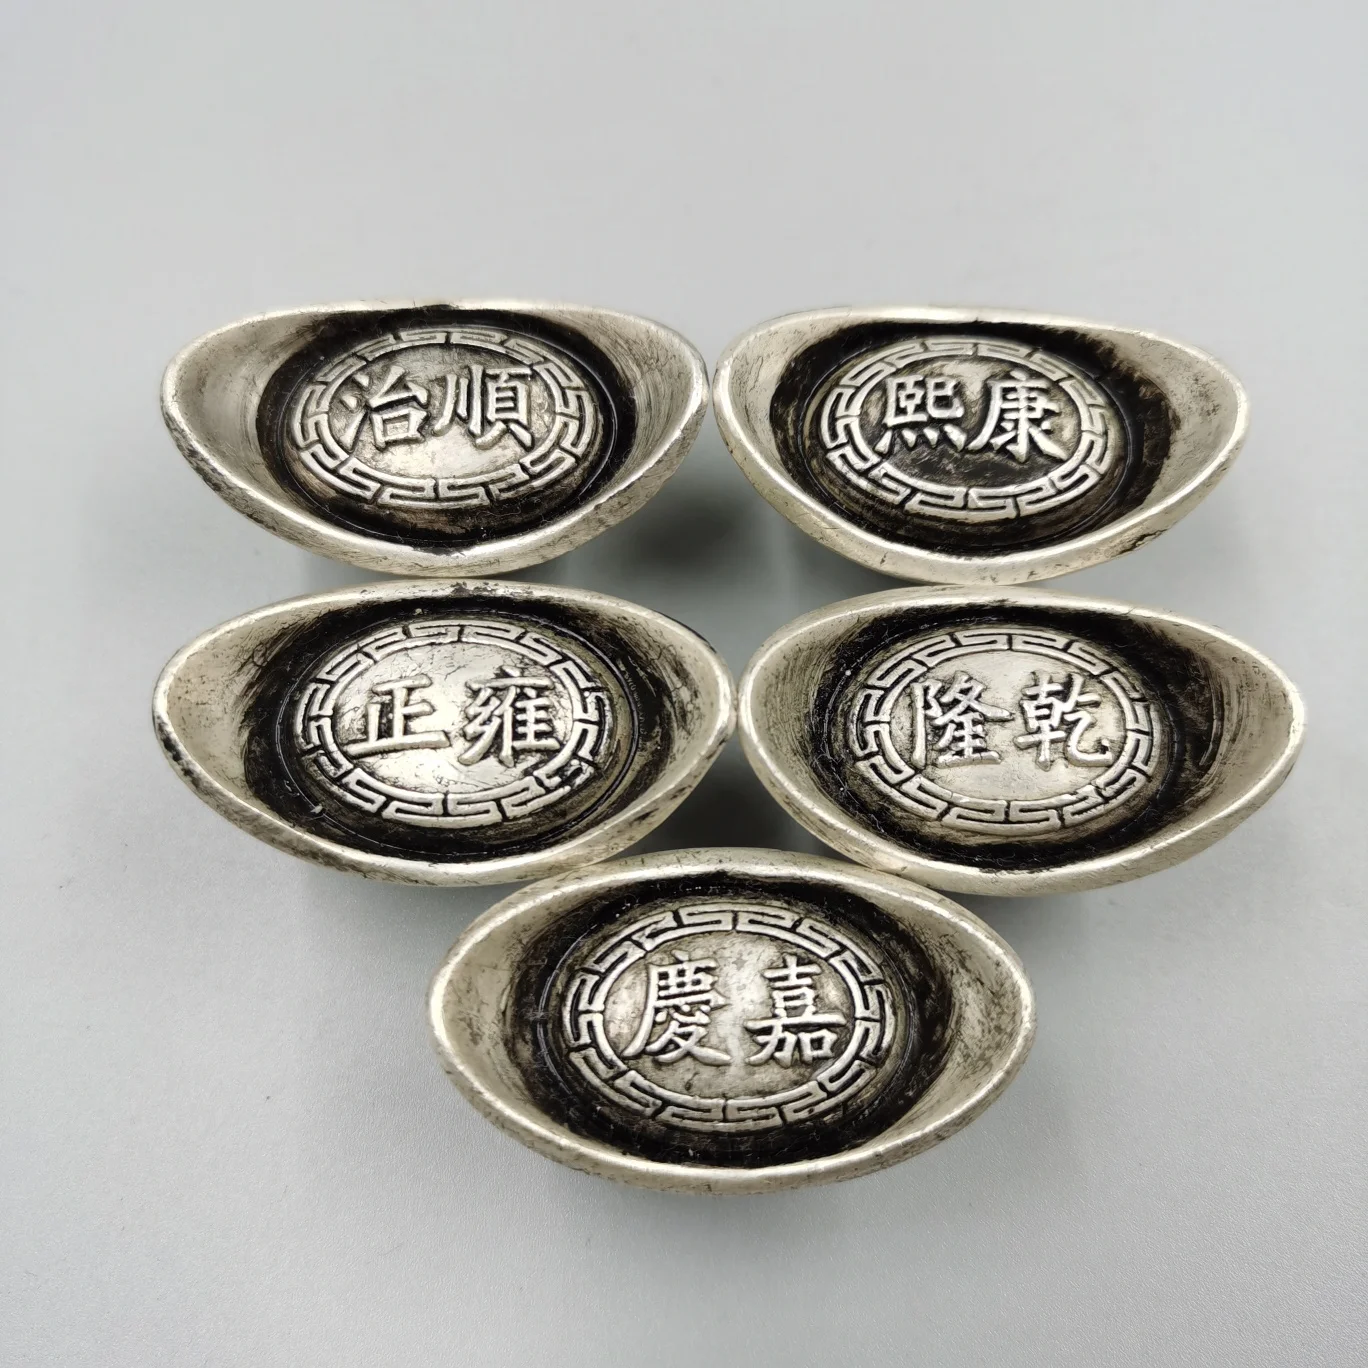 

Chinese Antique Collection 1 Set Qing Dynasty Five Emperors ,Silver Ingot Metal Handicraft Family Decoration